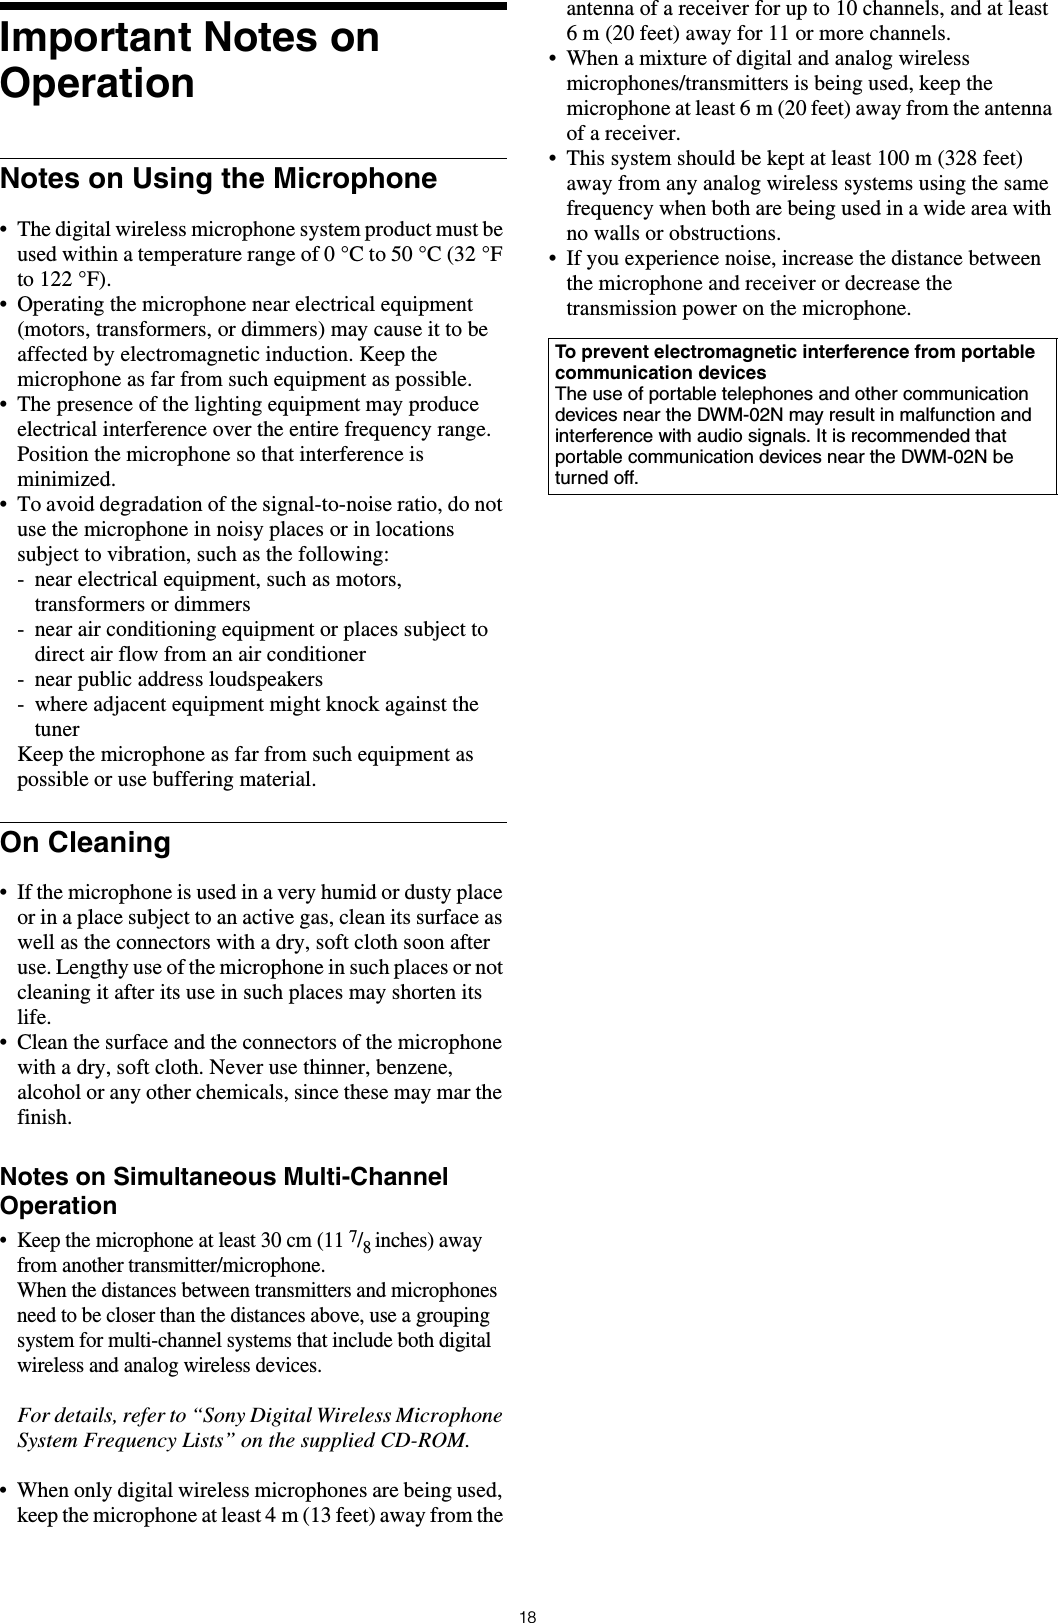 18Important Notes on OperationNotes on Using the Microphone• The digital wireless microphone system product must be used within a temperature range of 0 °C to 50 °C (32 °F to 122 °F).• Operating the microphone near electrical equipment (motors, transformers, or dimmers) may cause it to be affected by electromagnetic induction. Keep the microphone as far from such equipment as possible.• The presence of the lighting equipment may produce electrical interference over the entire frequency range. Position the microphone so that interference is minimized.• To avoid degradation of the signal-to-noise ratio, do not use the microphone in noisy places or in locations subject to vibration, such as the following:- near electrical equipment, such as motors, transformers or dimmers- near air conditioning equipment or places subject to direct air flow from an air conditioner- near public address loudspeakers- where adjacent equipment might knock against the tunerKeep the microphone as far from such equipment as possible or use buffering material.On Cleaning• If the microphone is used in a very humid or dusty place or in a place subject to an active gas, clean its surface as well as the connectors with a dry, soft cloth soon after use. Lengthy use of the microphone in such places or not cleaning it after its use in such places may shorten its life.• Clean the surface and the connectors of the microphone with a dry, soft cloth. Never use thinner, benzene, alcohol or any other chemicals, since these may mar the finish.Notes on Simultaneous Multi-Channel Operation• Keep the microphone at least 30 cm (11 7/8 inches) away from another transmitter/microphone.When the distances between transmitters and microphones need to be closer than the distances above, use a grouping system for multi-channel systems that include both digital wireless and analog wireless devices.For details, refer to “Sony Digital Wireless Microphone System Frequency Lists” on the supplied CD-ROM.• When only digital wireless microphones are being used, keep the microphone at least 4 m (13 feet) away from the antenna of a receiver for up to 10 channels, and at least 6 m (20 feet) away for 11 or more channels.• When a mixture of digital and analog wireless microphones/transmitters is being used, keep the microphone at least 6 m (20 feet) away from the antenna of a receiver.• This system should be kept at least 100 m (328 feet) away from any analog wireless systems using the same frequency when both are being used in a wide area with no walls or obstructions.• If you experience noise, increase the distance between the microphone and receiver or decrease the transmission power on the microphone.To prevent electromagnetic interference from portable communication devicesThe use of portable telephones and other communication devices near the DWM-02N may result in malfunction and interference with audio signals. It is recommended that portable communication devices near the DWM-02N be turned off.